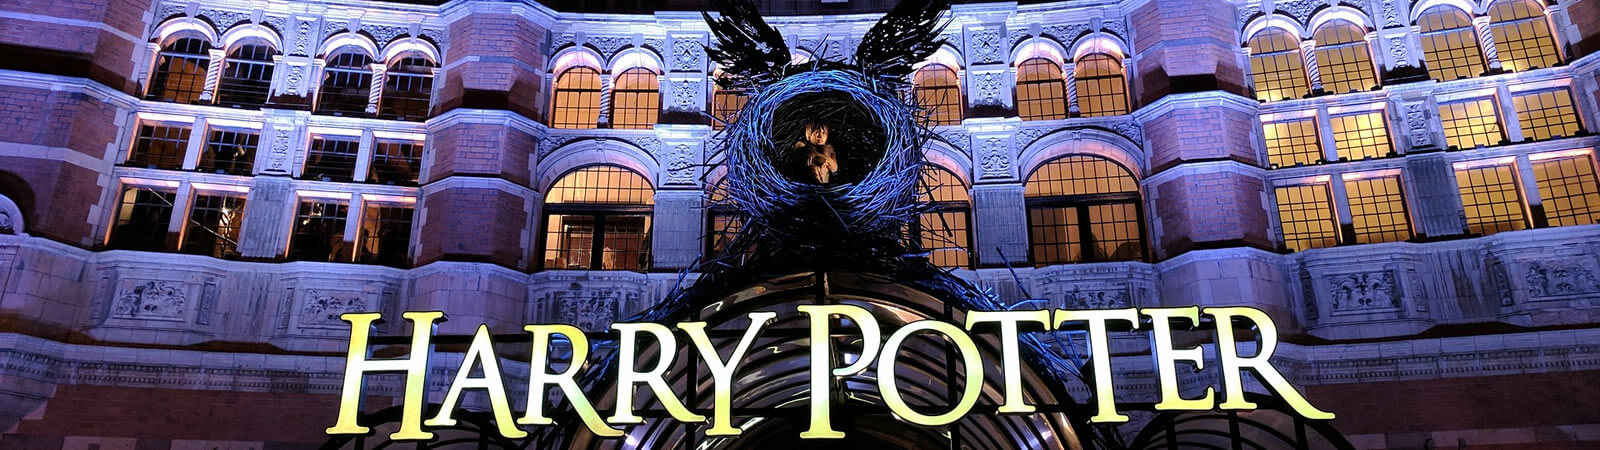 Harry Potter Attractions In And Around London